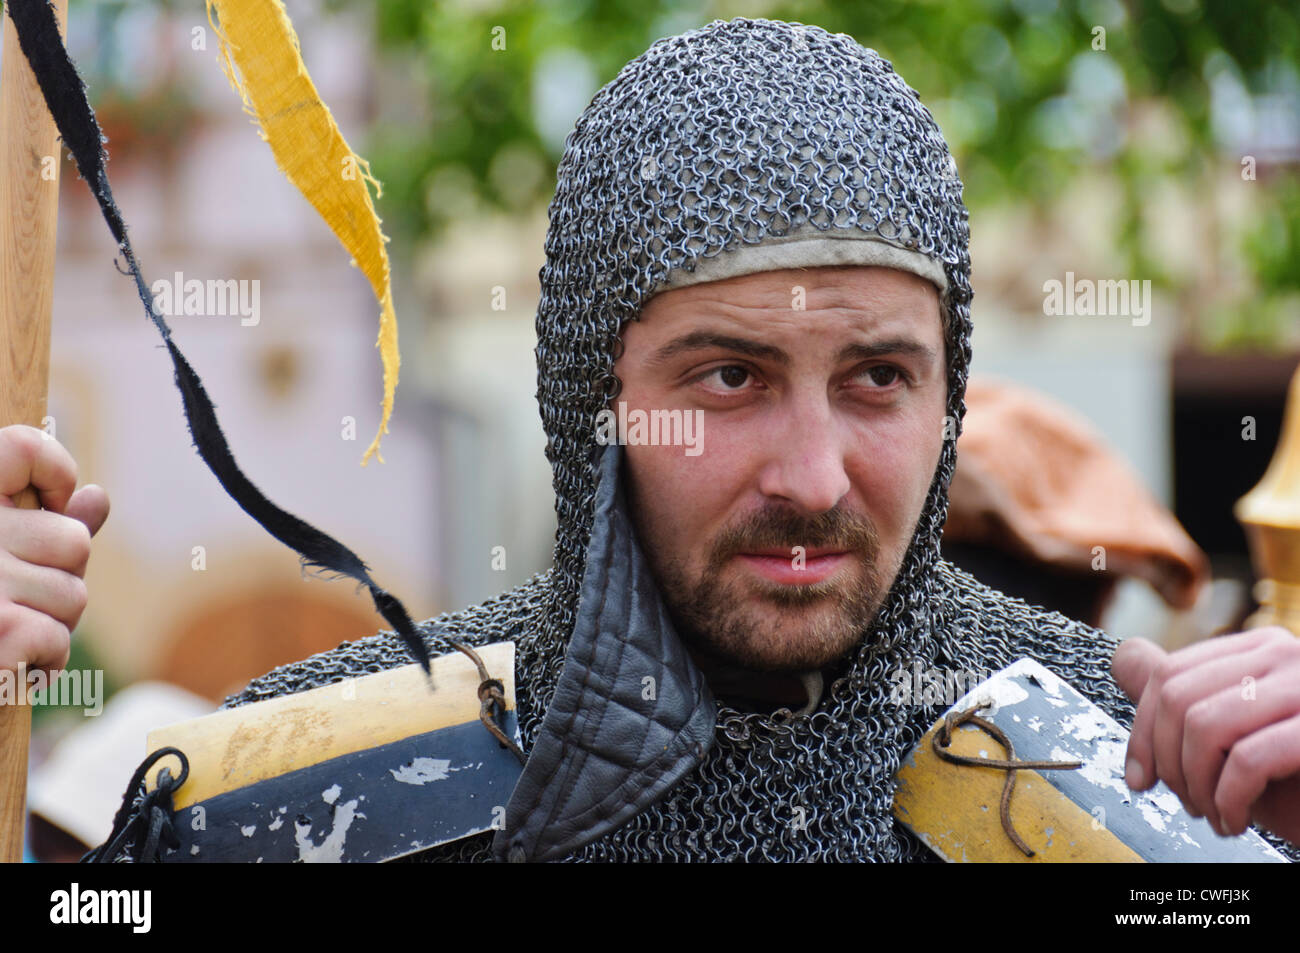 Man in arms medieval costume pikeman knight at an medieval market, historical spa Staufer town Bad Wimpfen South Germany Stock Photo